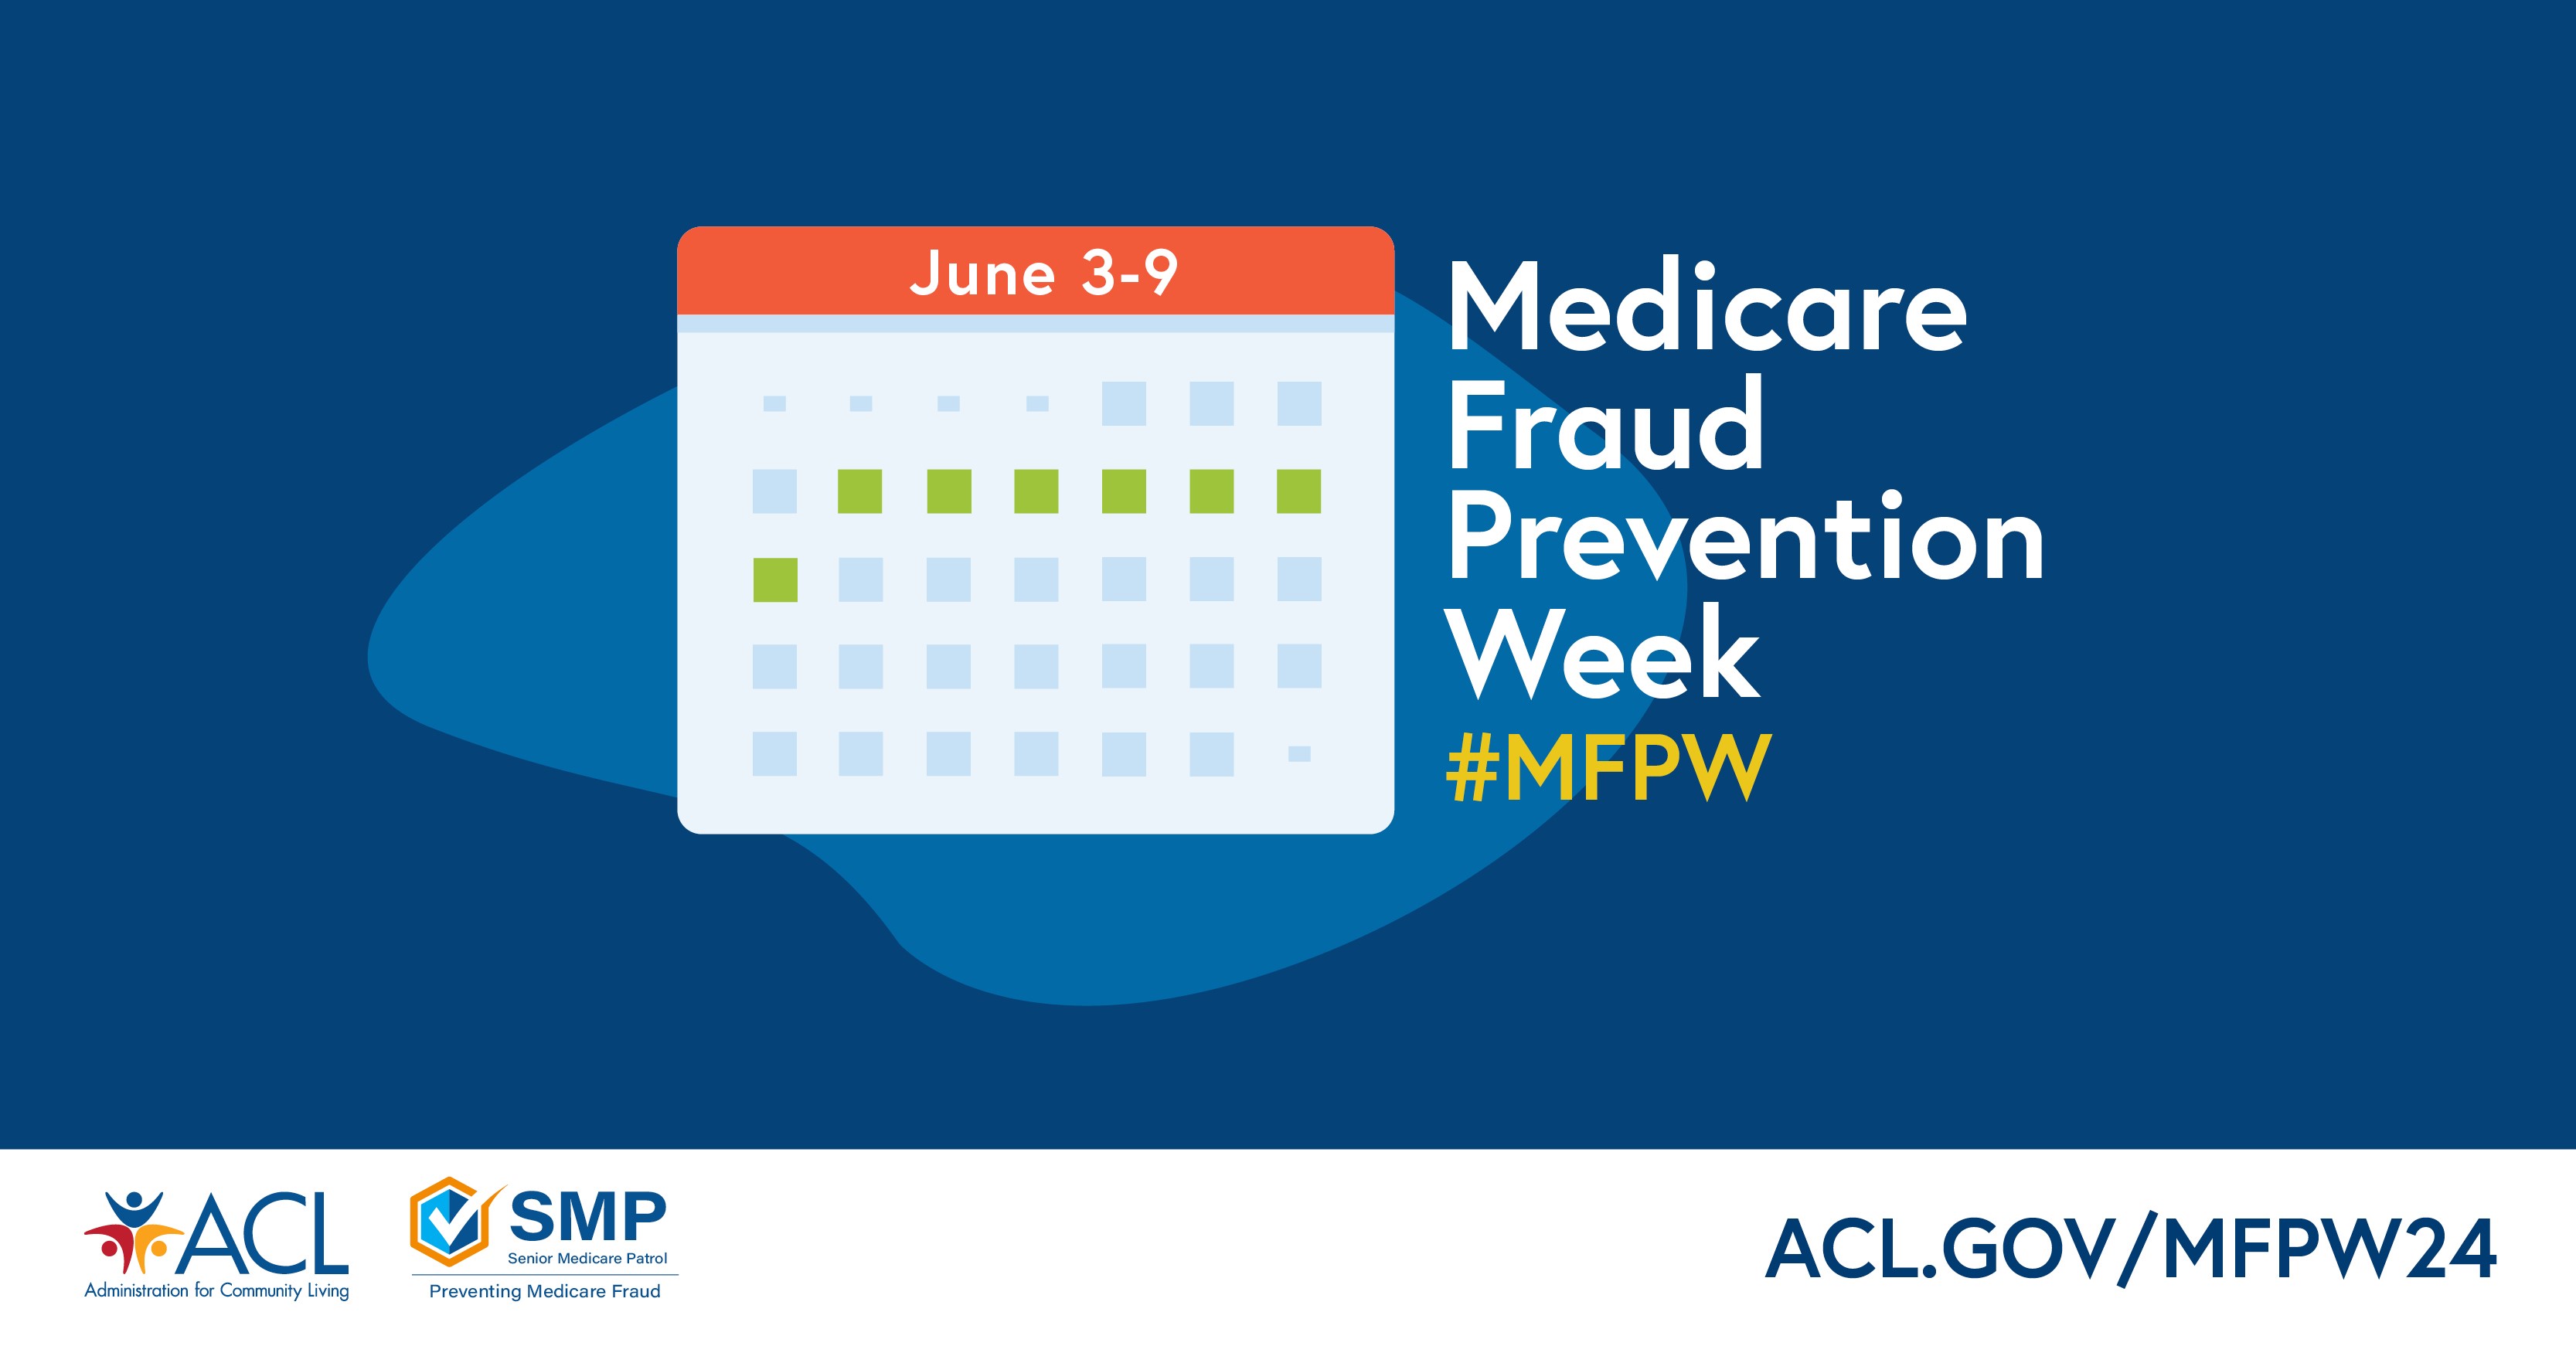 Medicare Fraud Prevention Week, June 3-9. ACL.gov/MFPW24, ACL logo, SMP logo